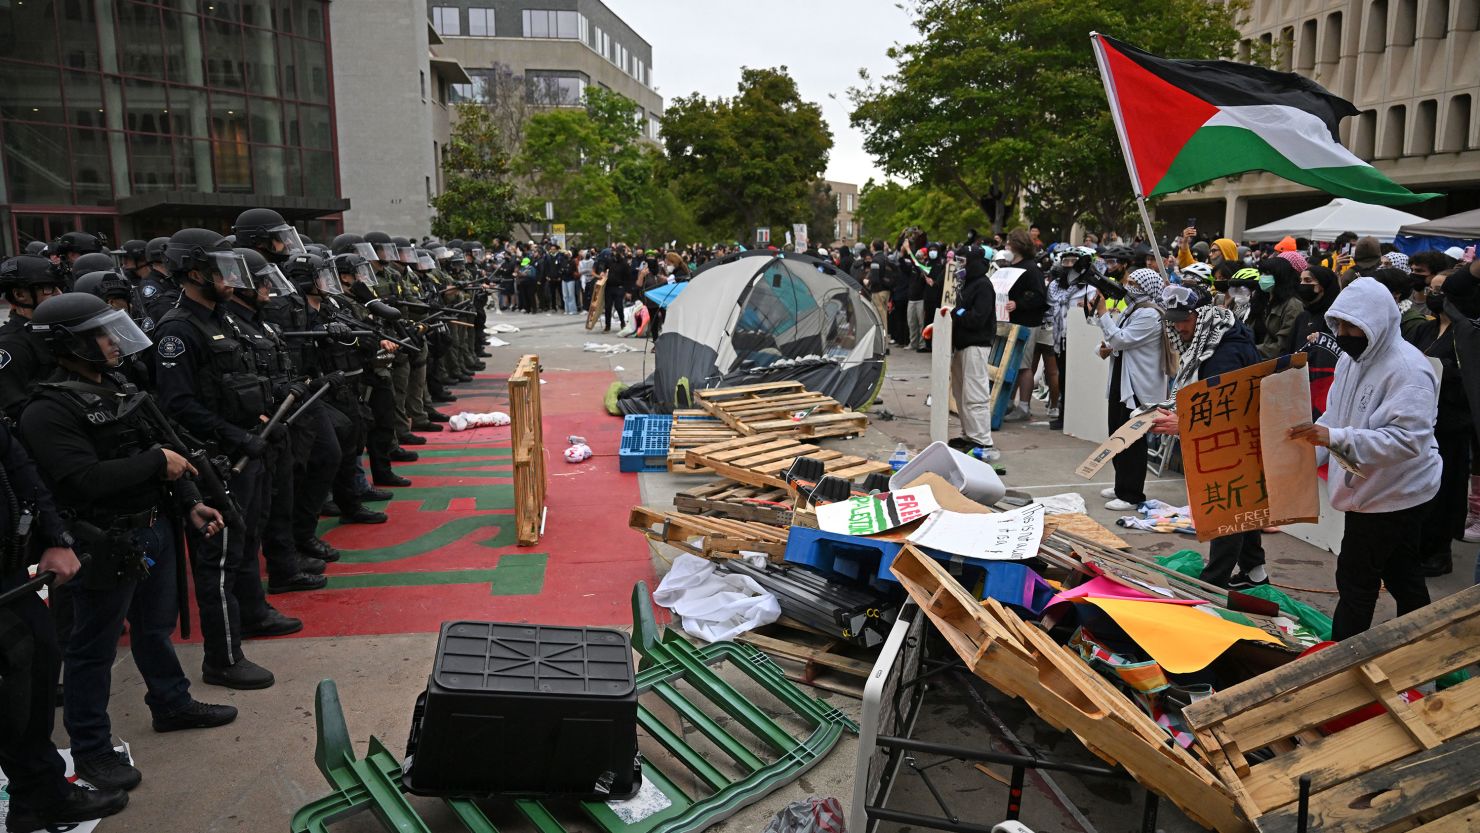 Pro-Palestinian demonstrators confront police as they clear an encampment after protesters surrounded the Physical Sciences Lecture Hall at the University of California, Irvine, Wednesday.